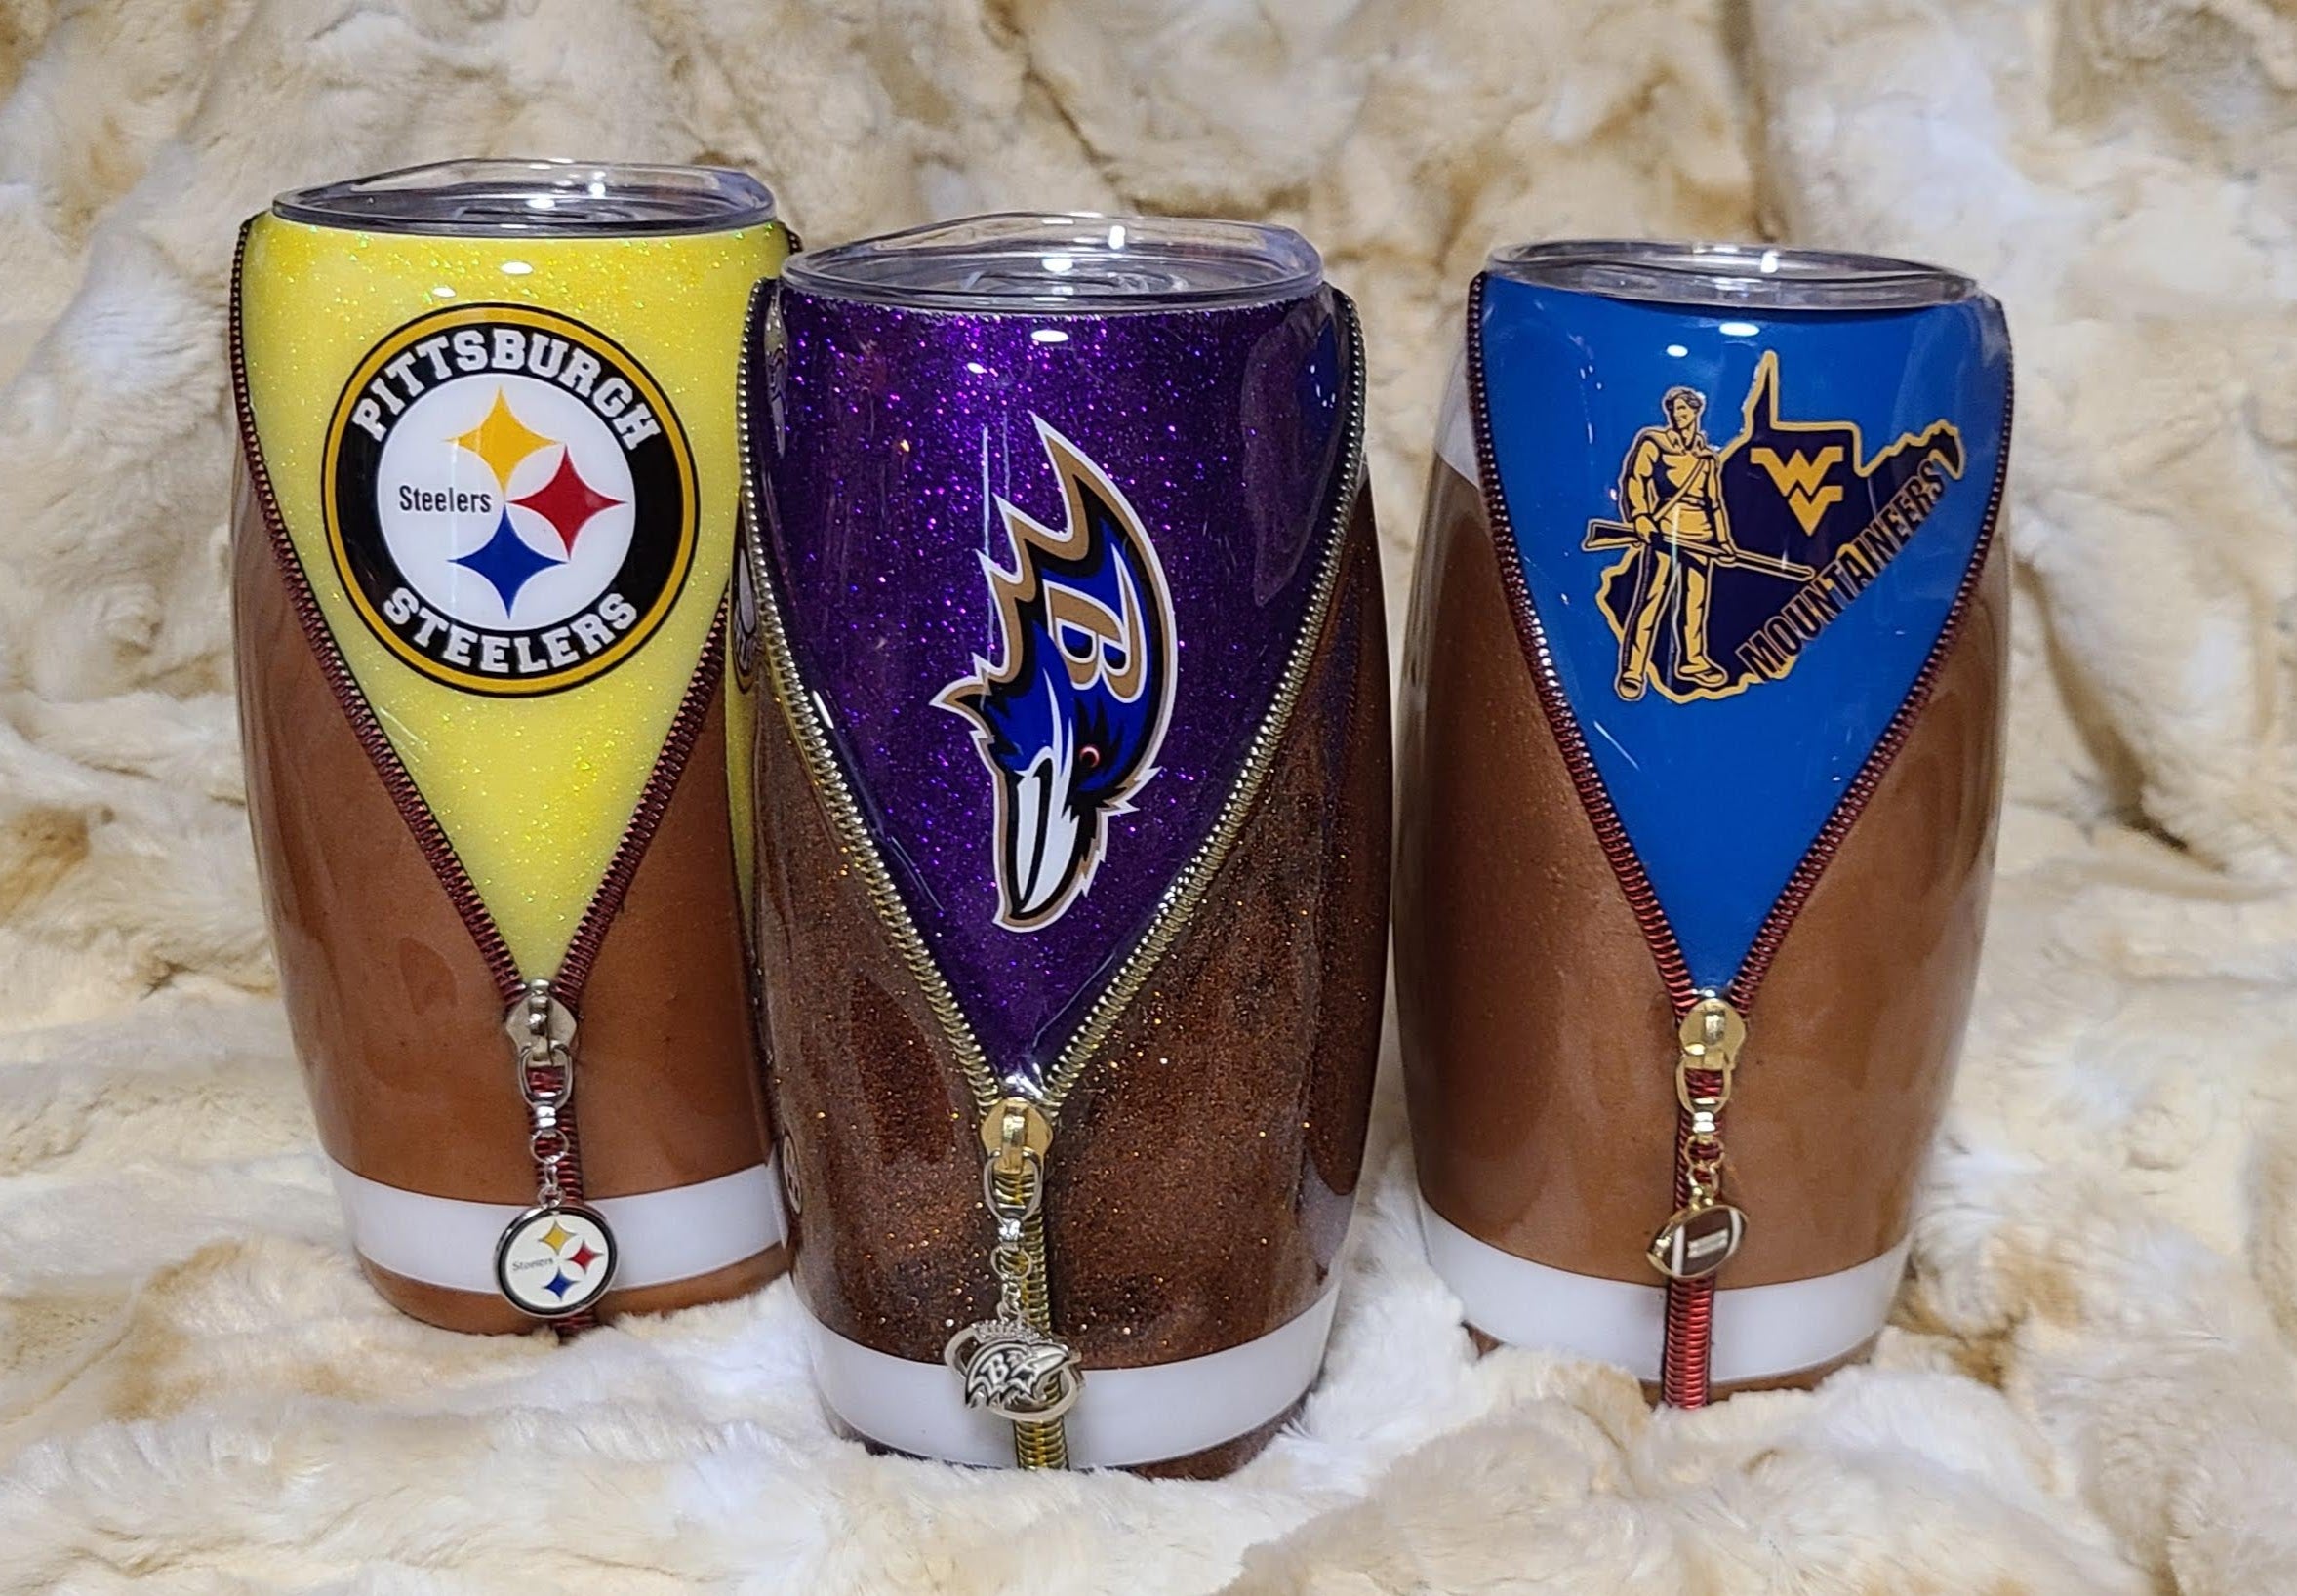 Personalized Steelers Tumbler